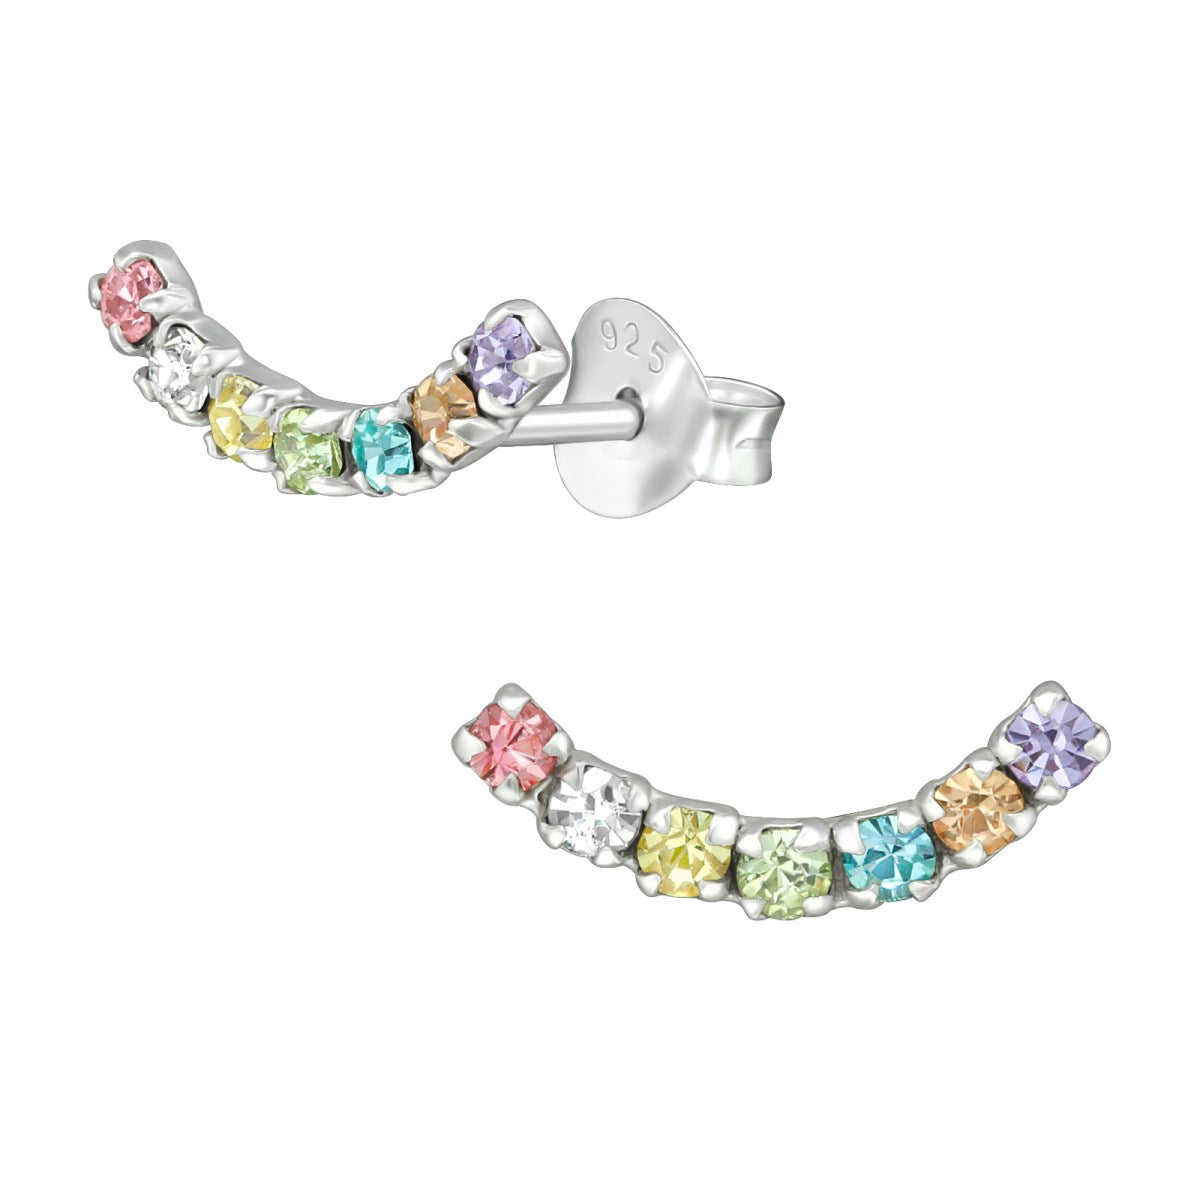 Silver Curvy Stud Earrings with Crystals